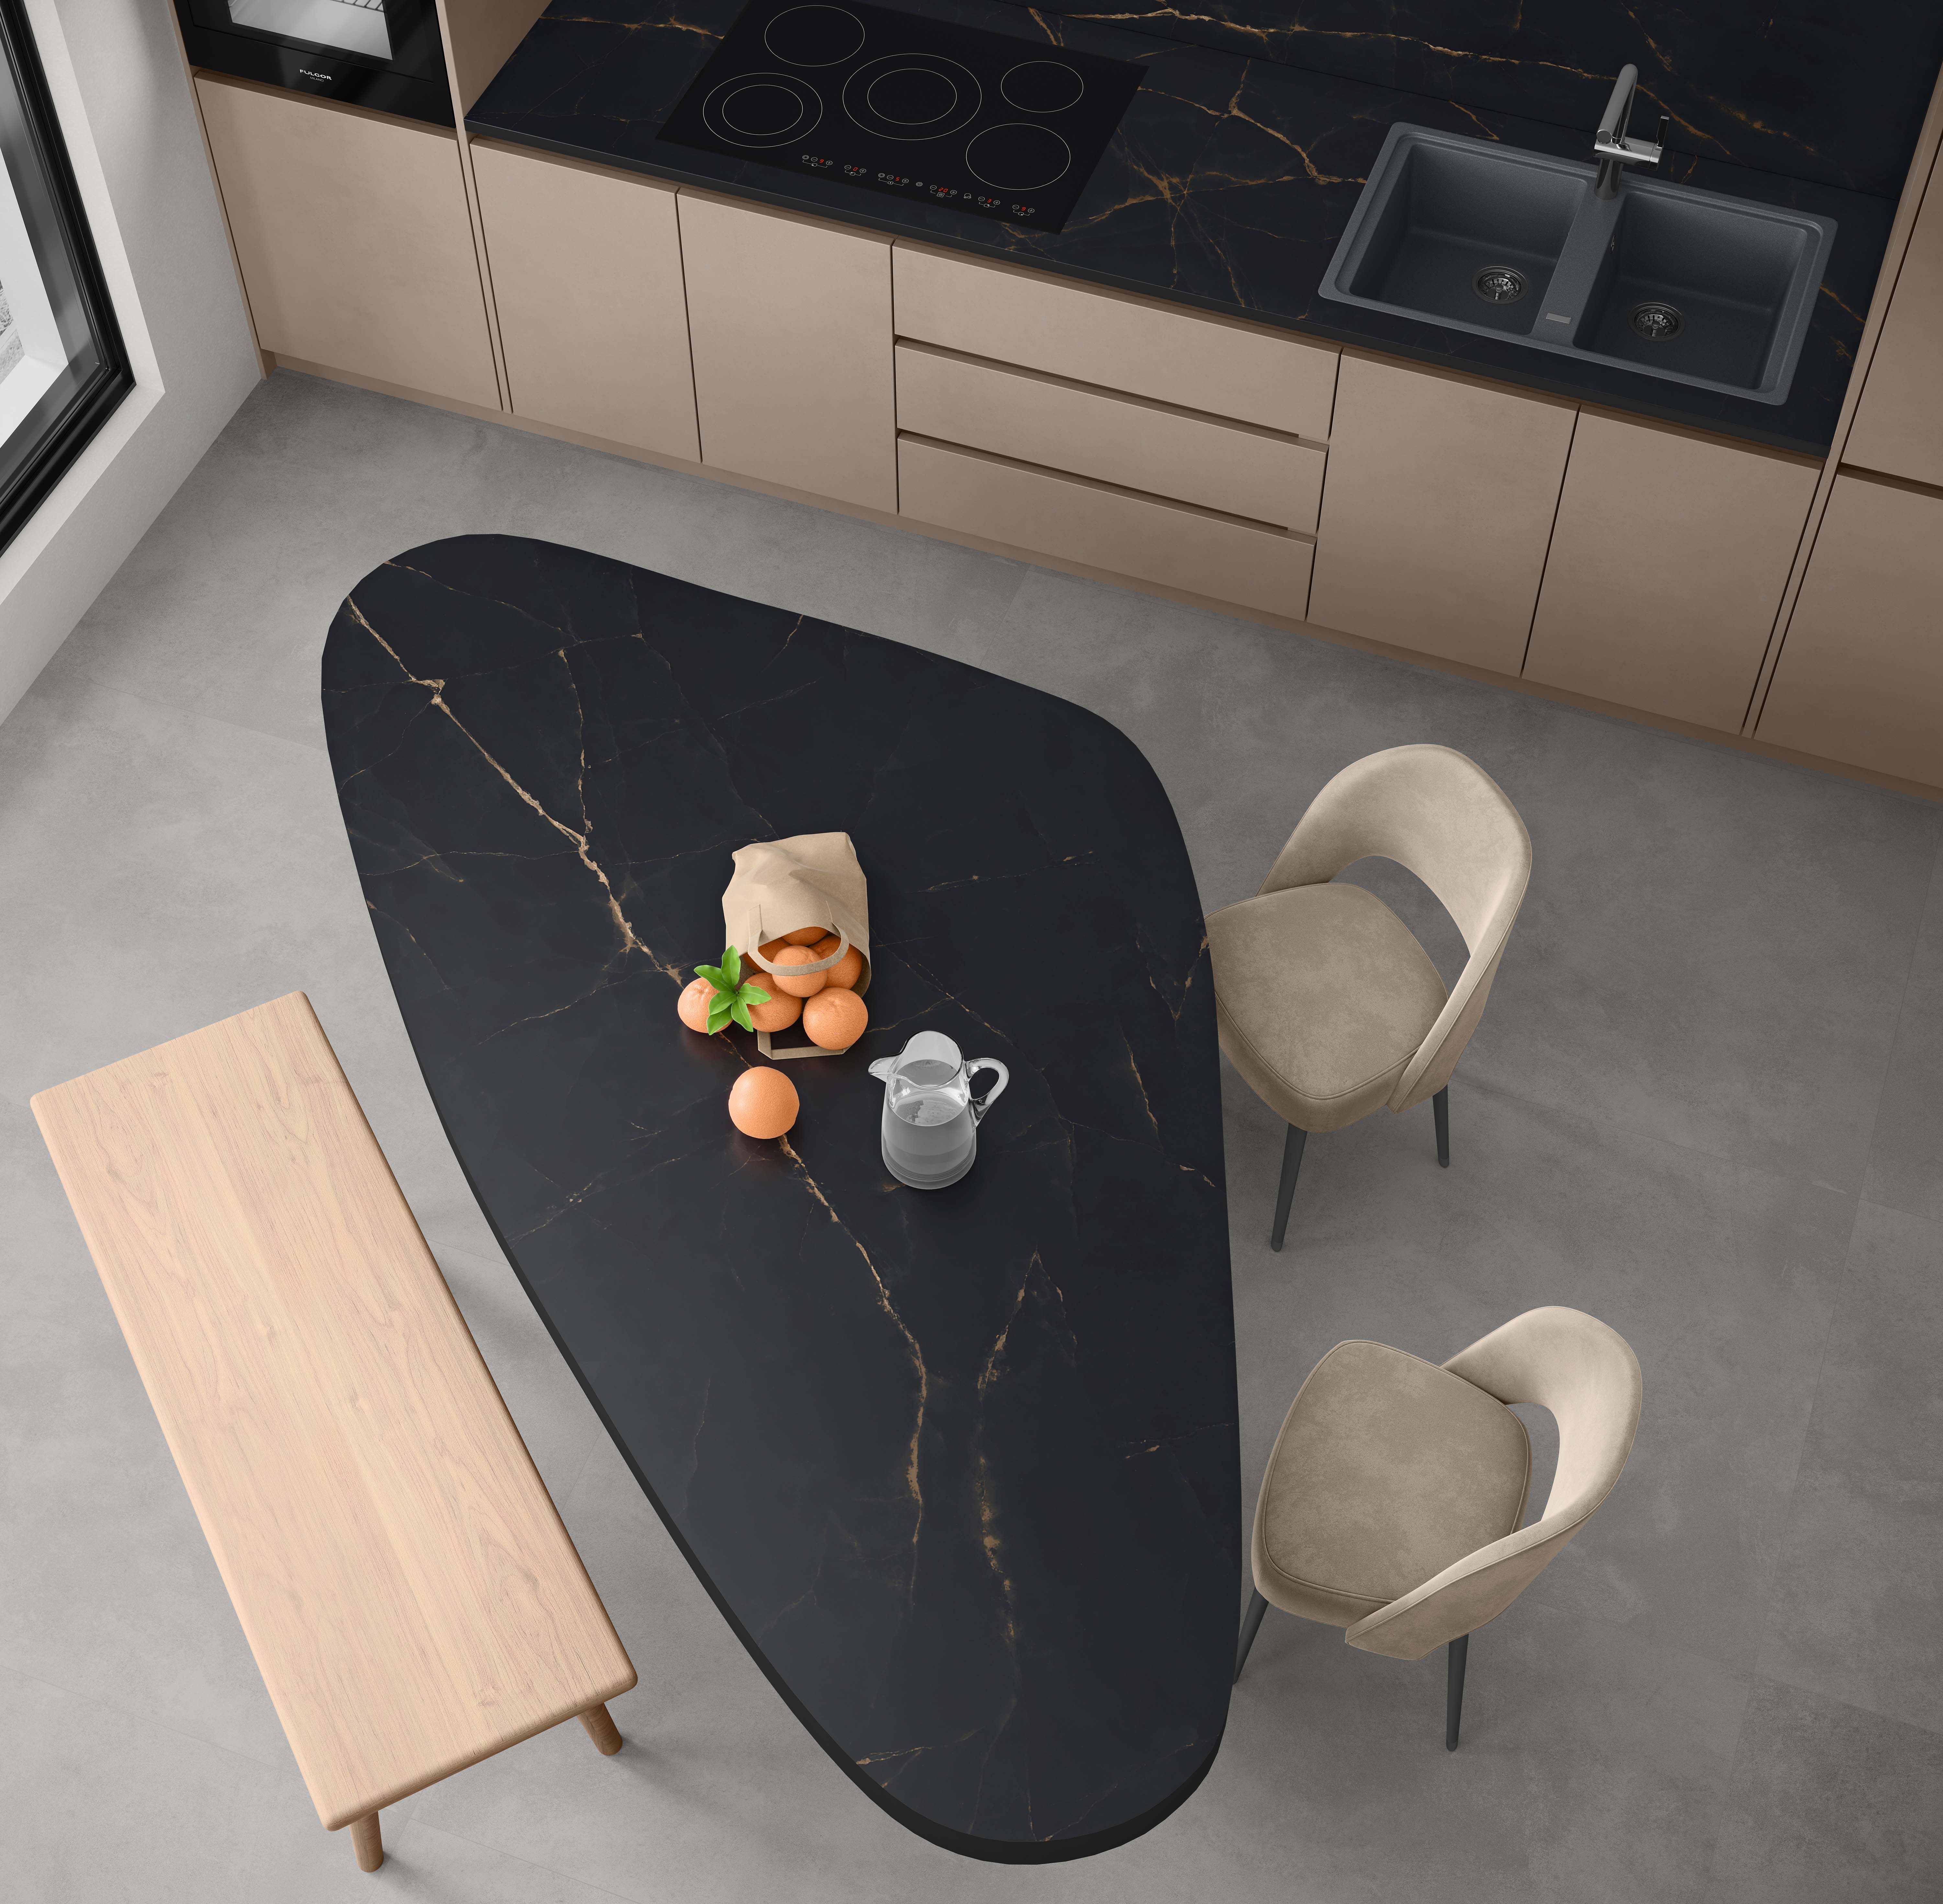 Take a closer look at each of the Lamar porcelain surface decors.